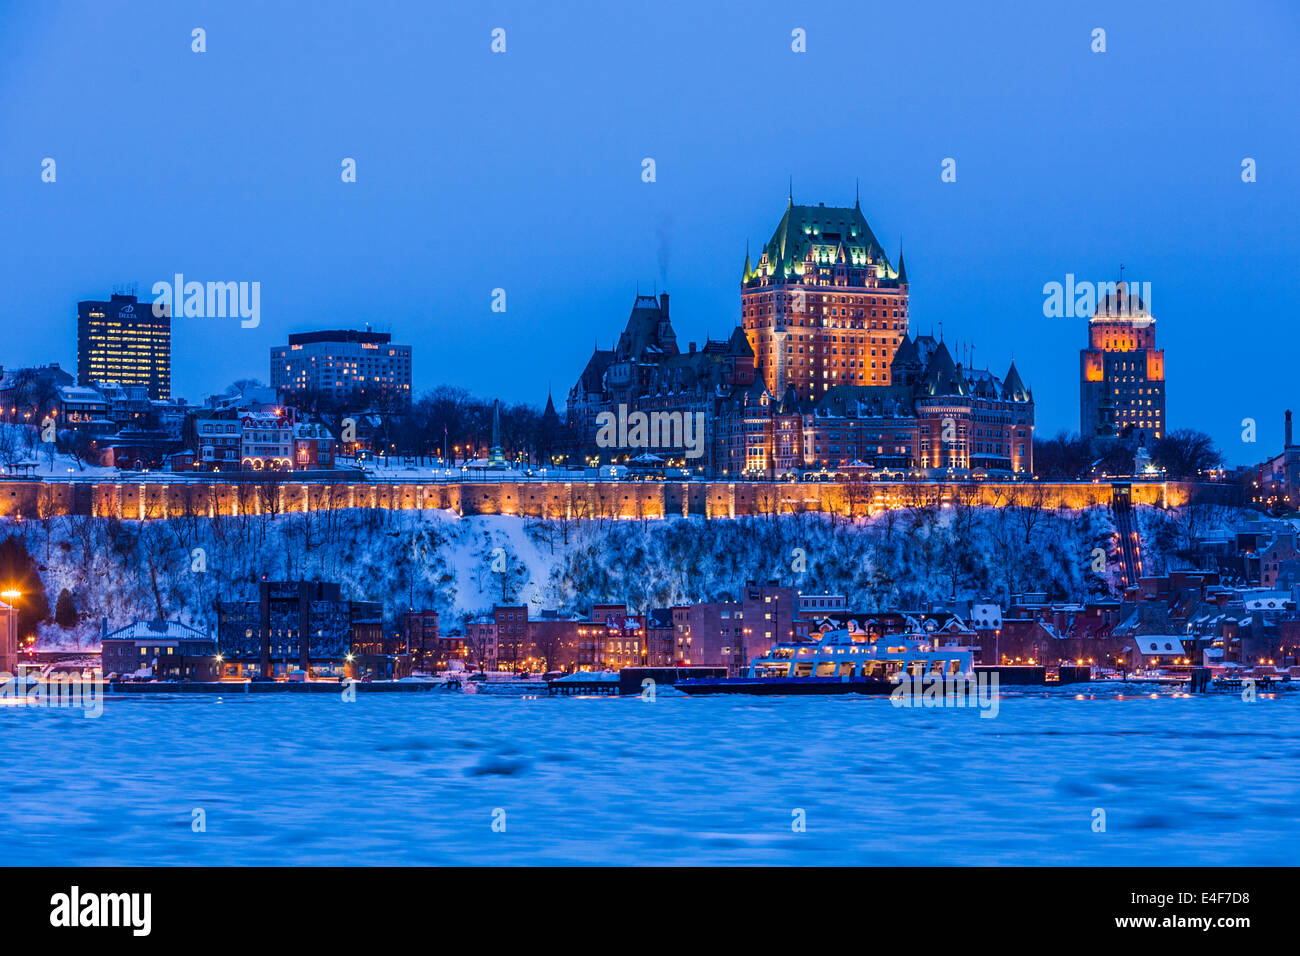 City Skyline At Twilight Showing Chateau Frontenac In Winter As Seen From Across The Saint